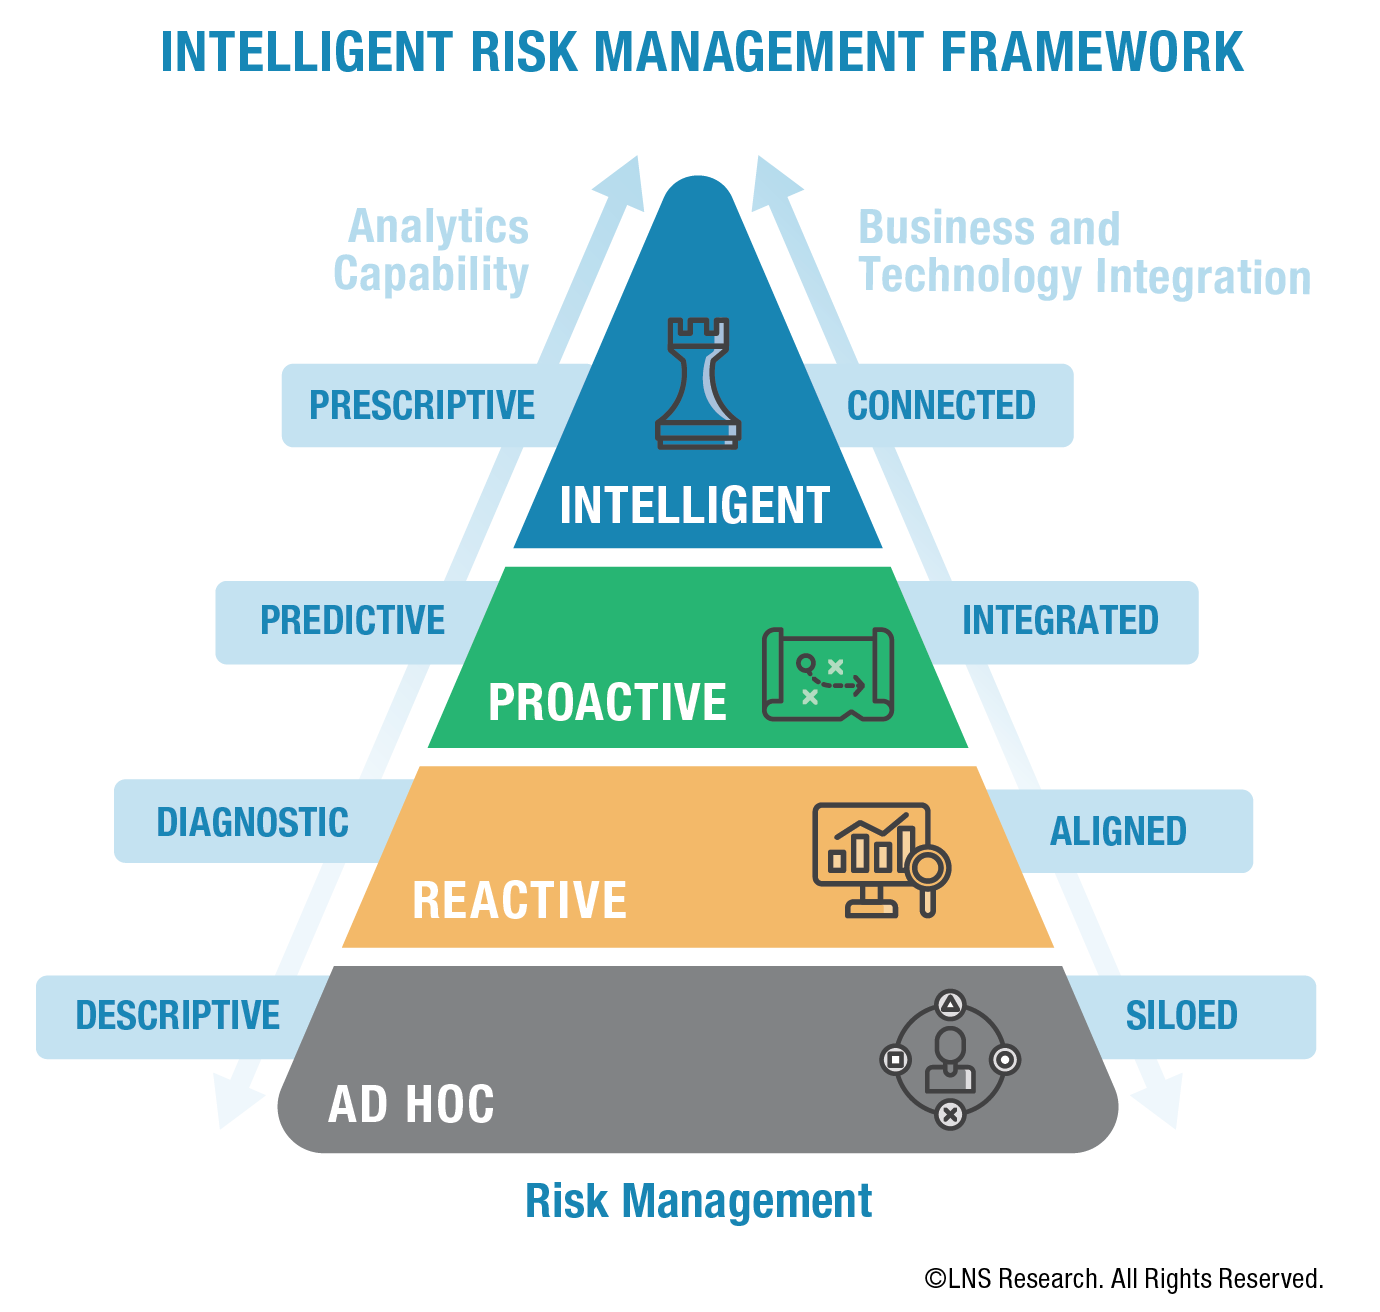 Operational Risk Management Gets Smart with AI